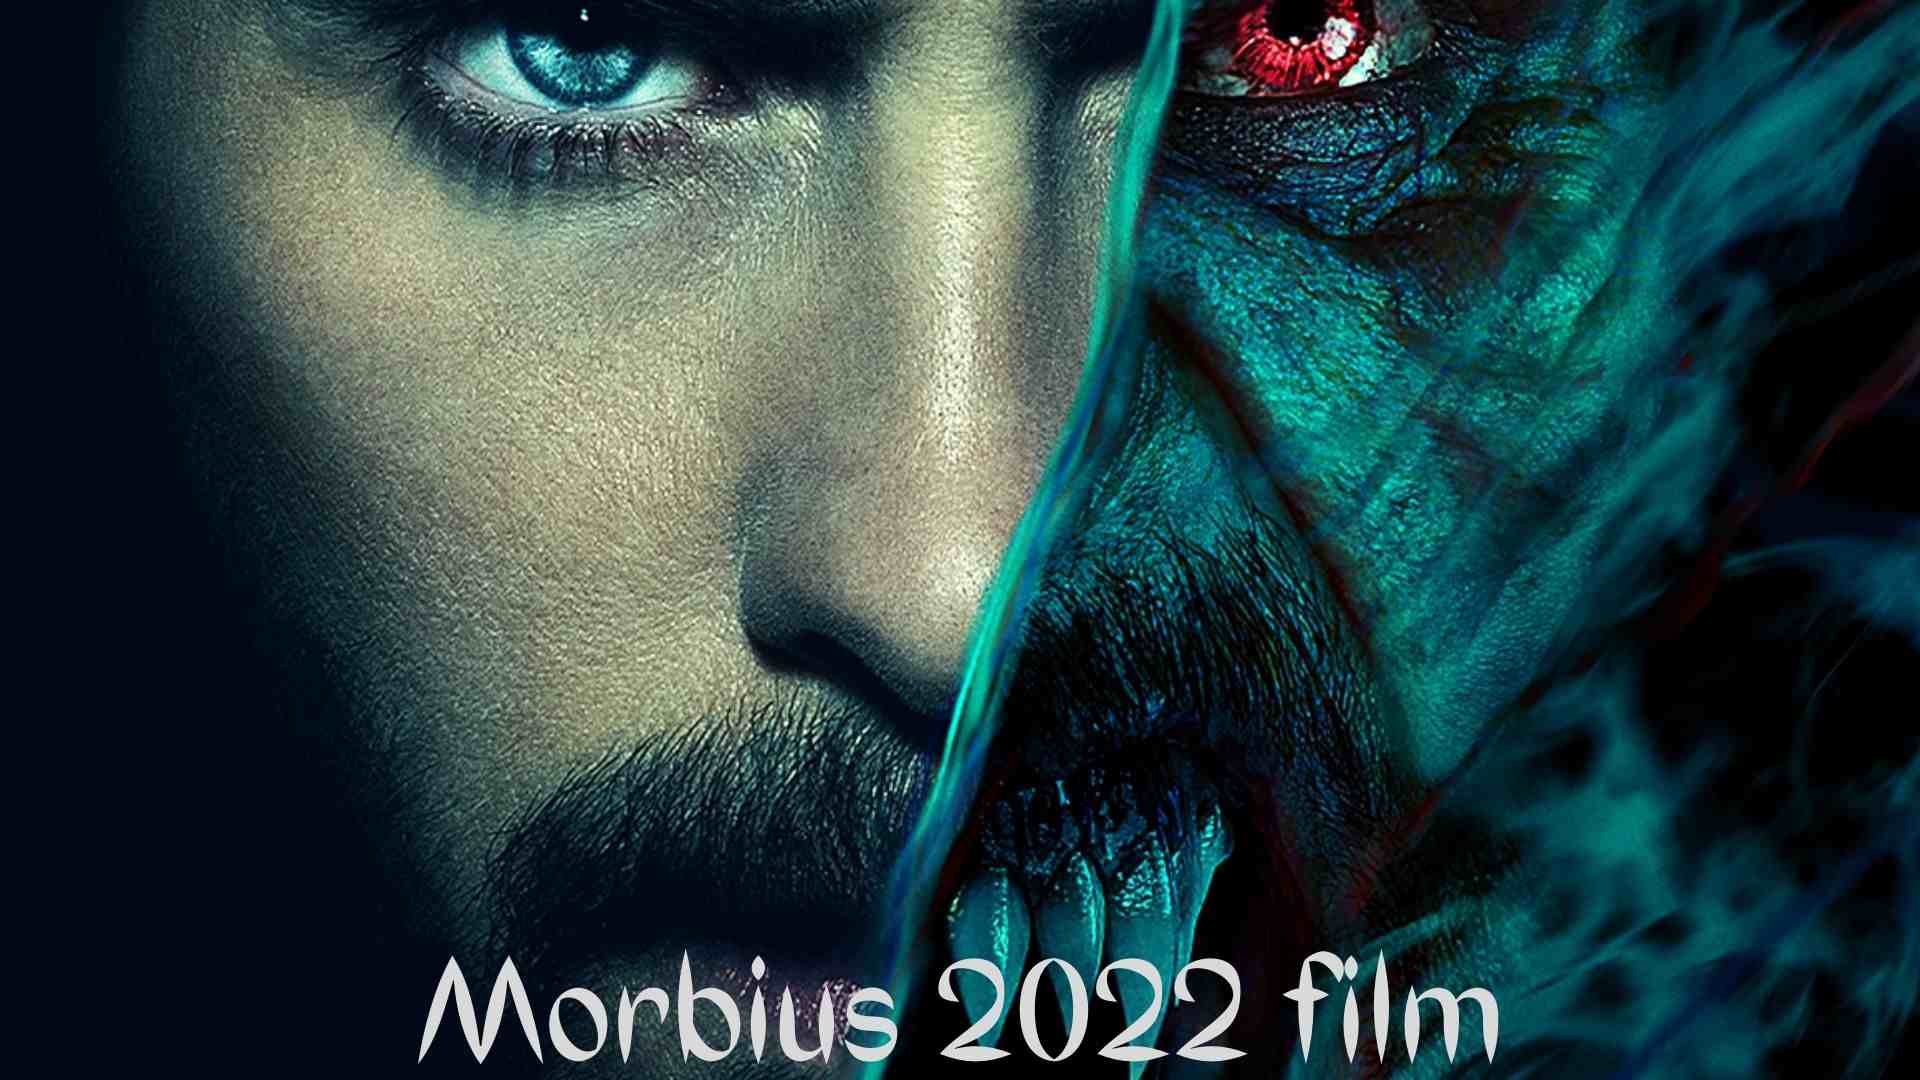 Morbius 2022 film Parents guide and Age Rating